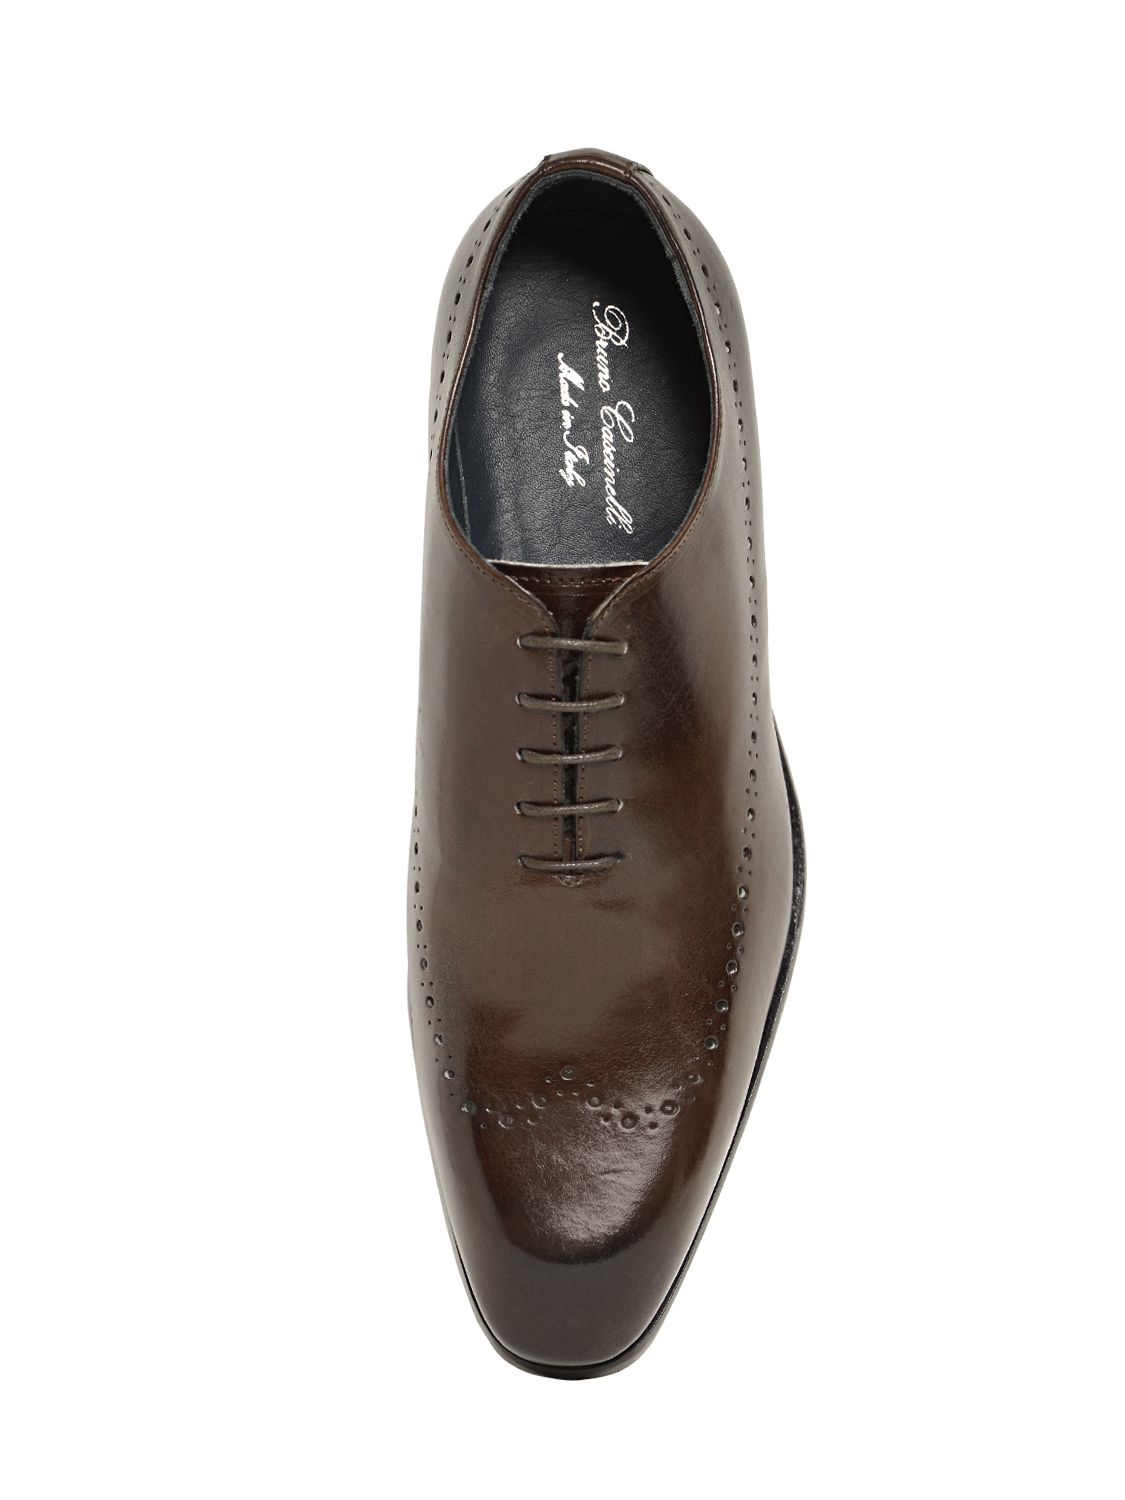 Gianni Russo Perforated Leather Oxford Lace-up Shoes in Dark Brown ...